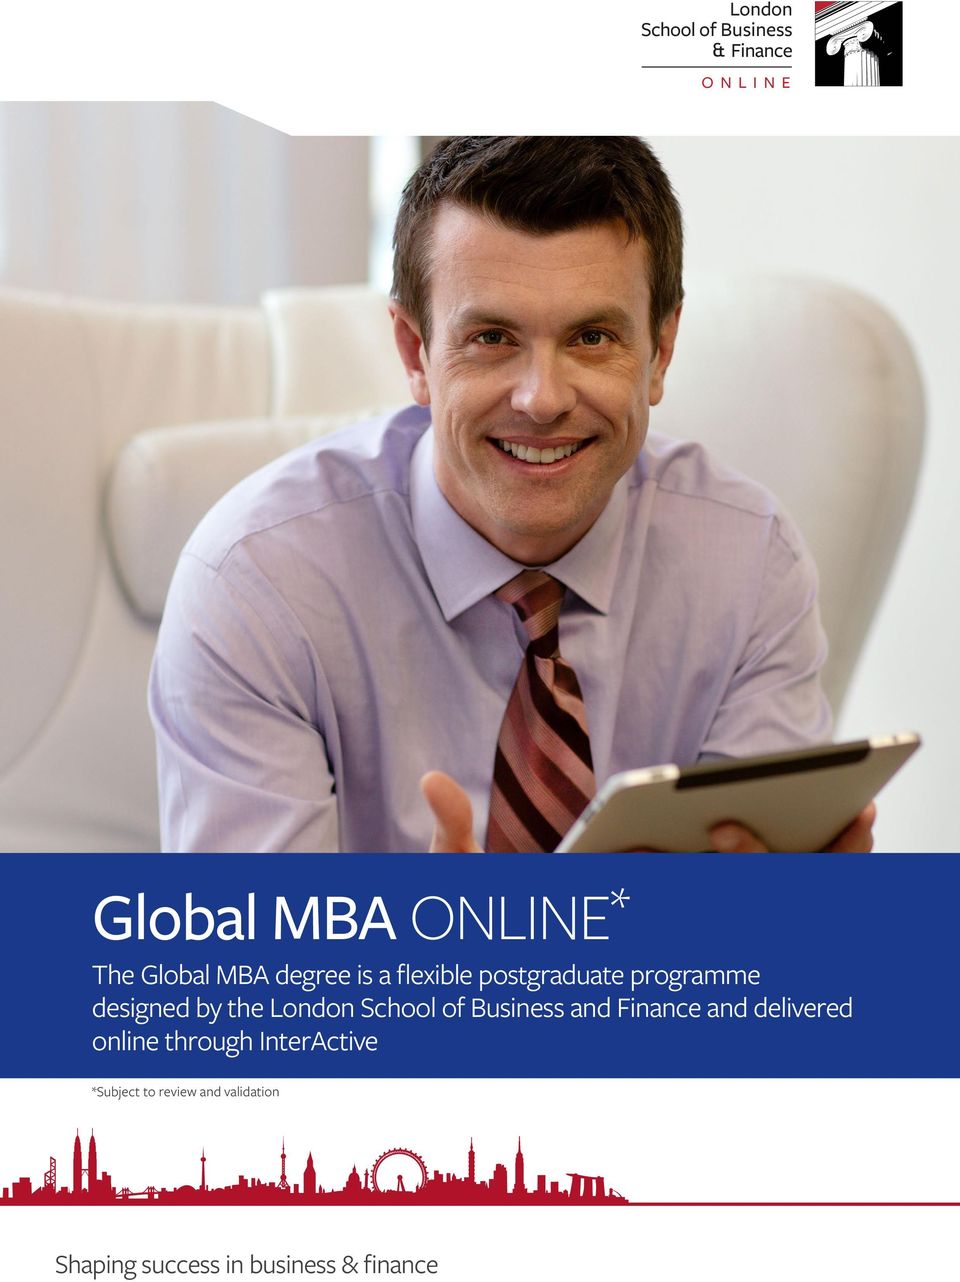 School of Business and Finance and delivered online through InterActive